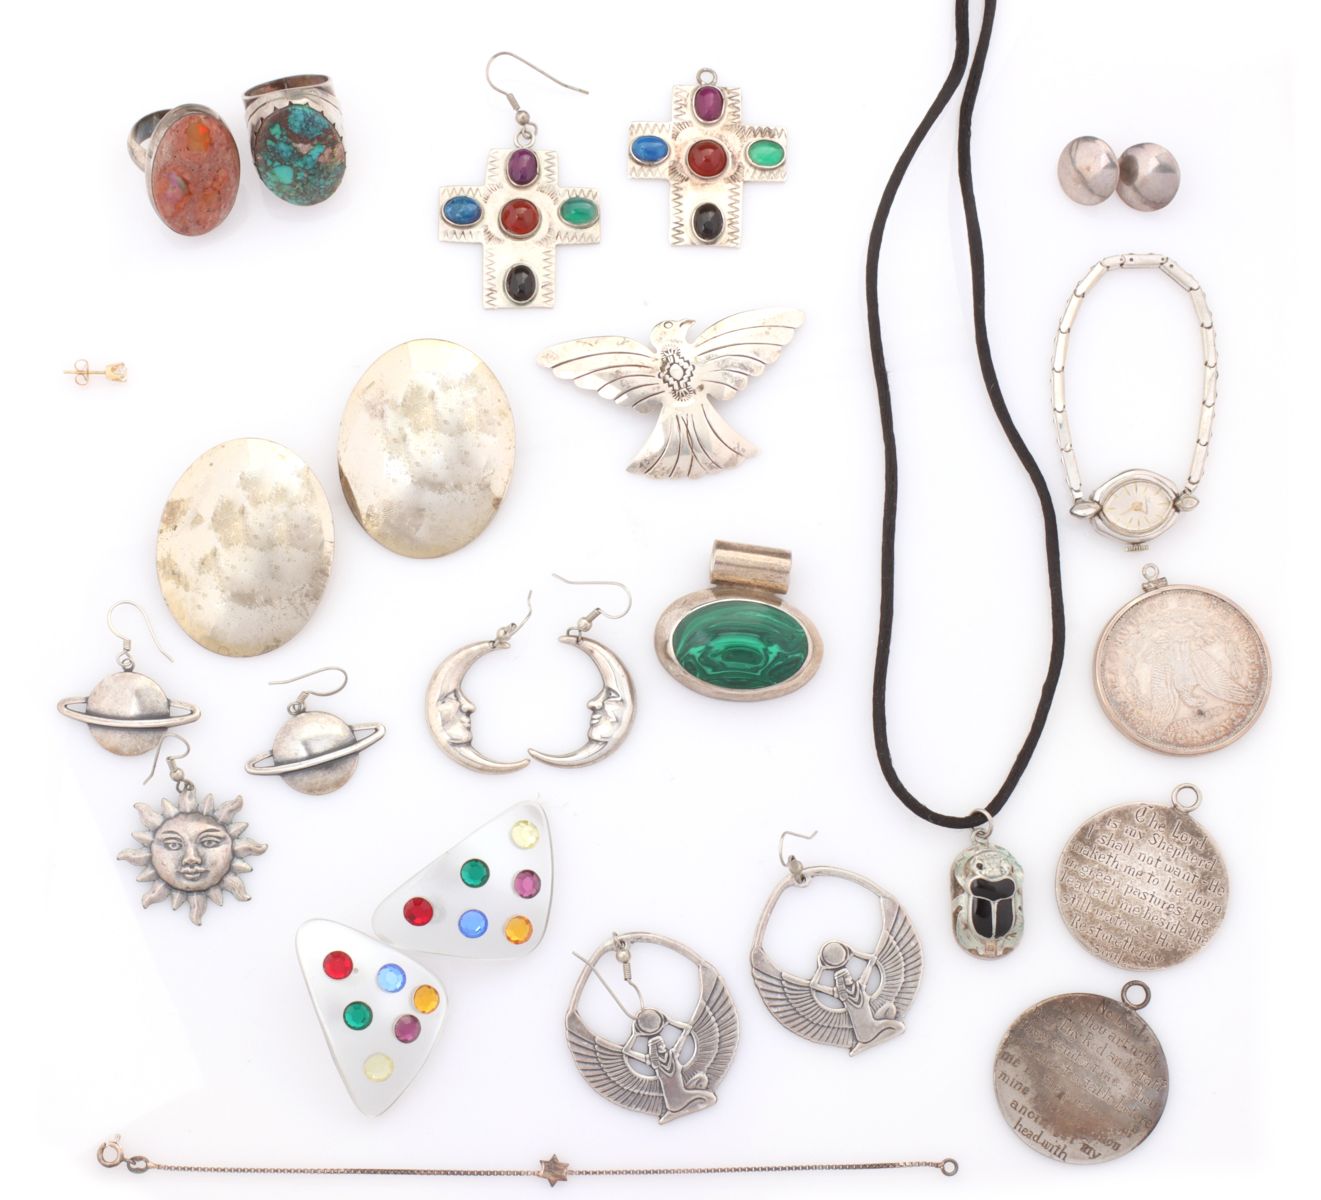 AN ESTATE LOT OF JEWELRY